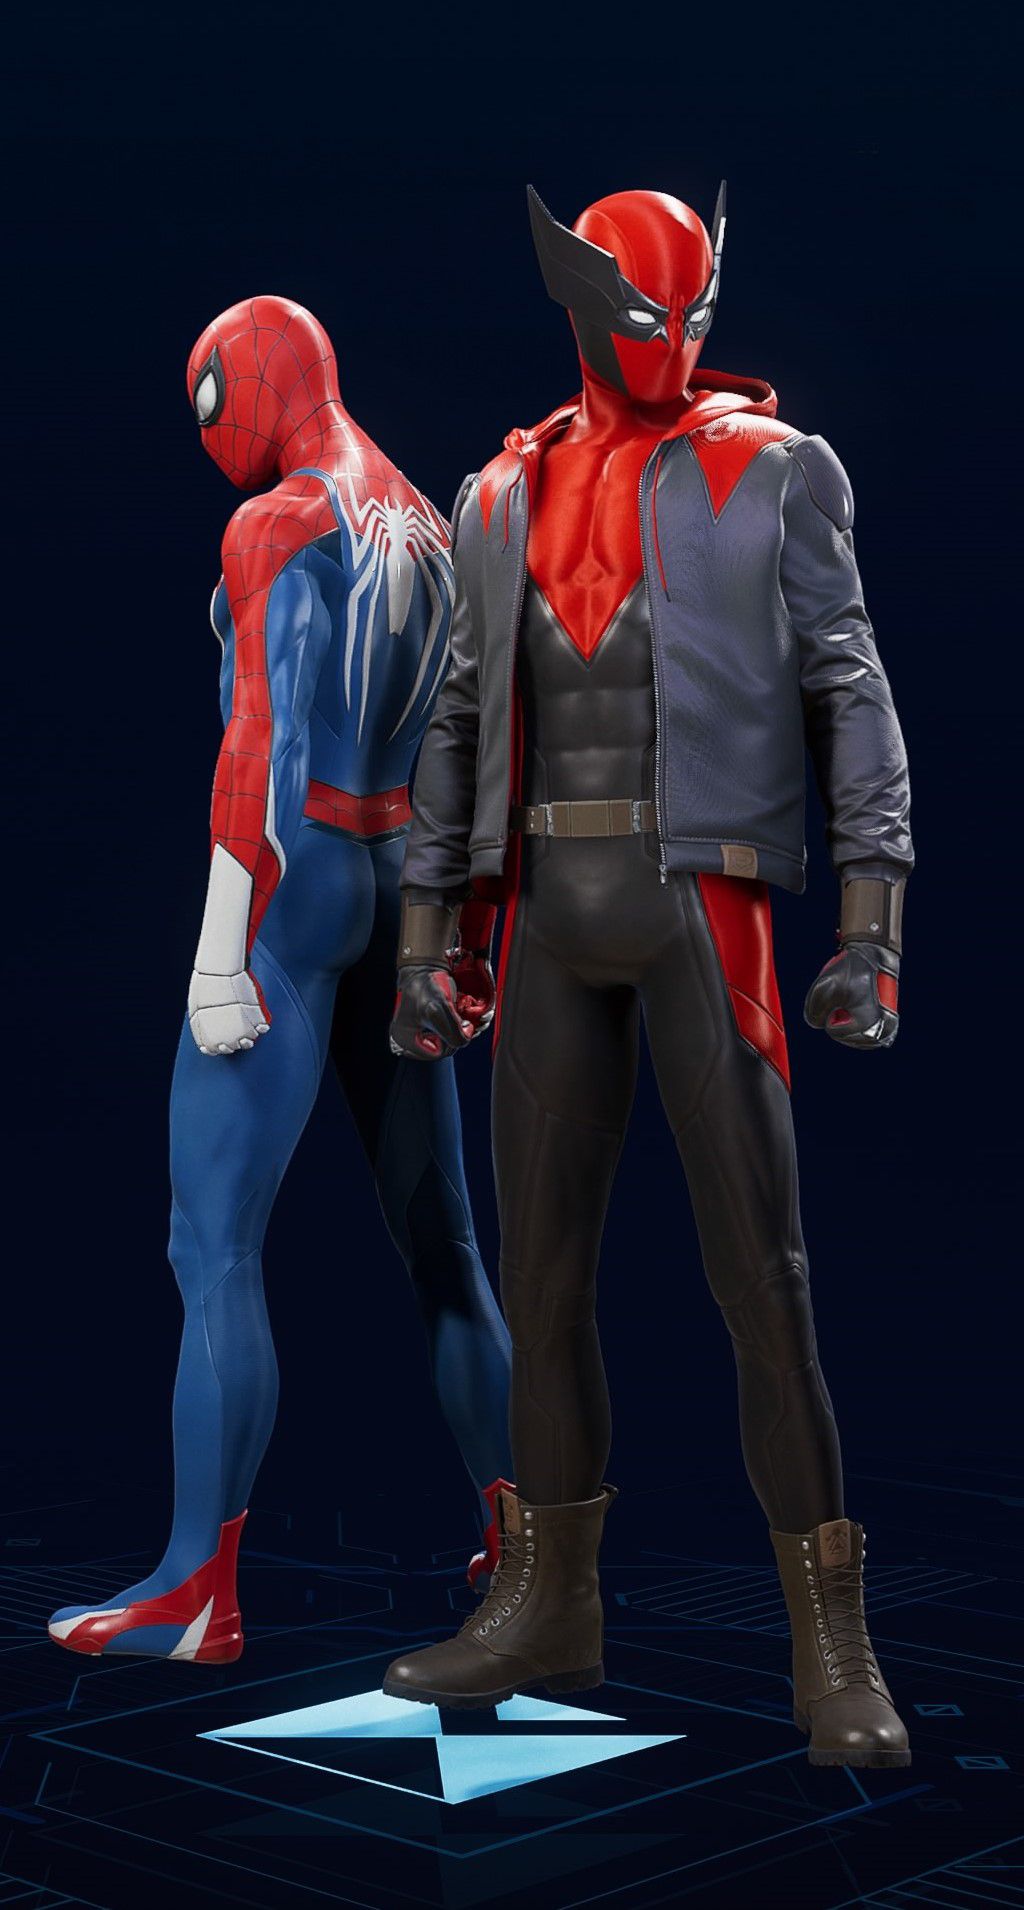 Miles Morales stands in his Best There Is Suit in the suit selection screen of Spider-Man 2.